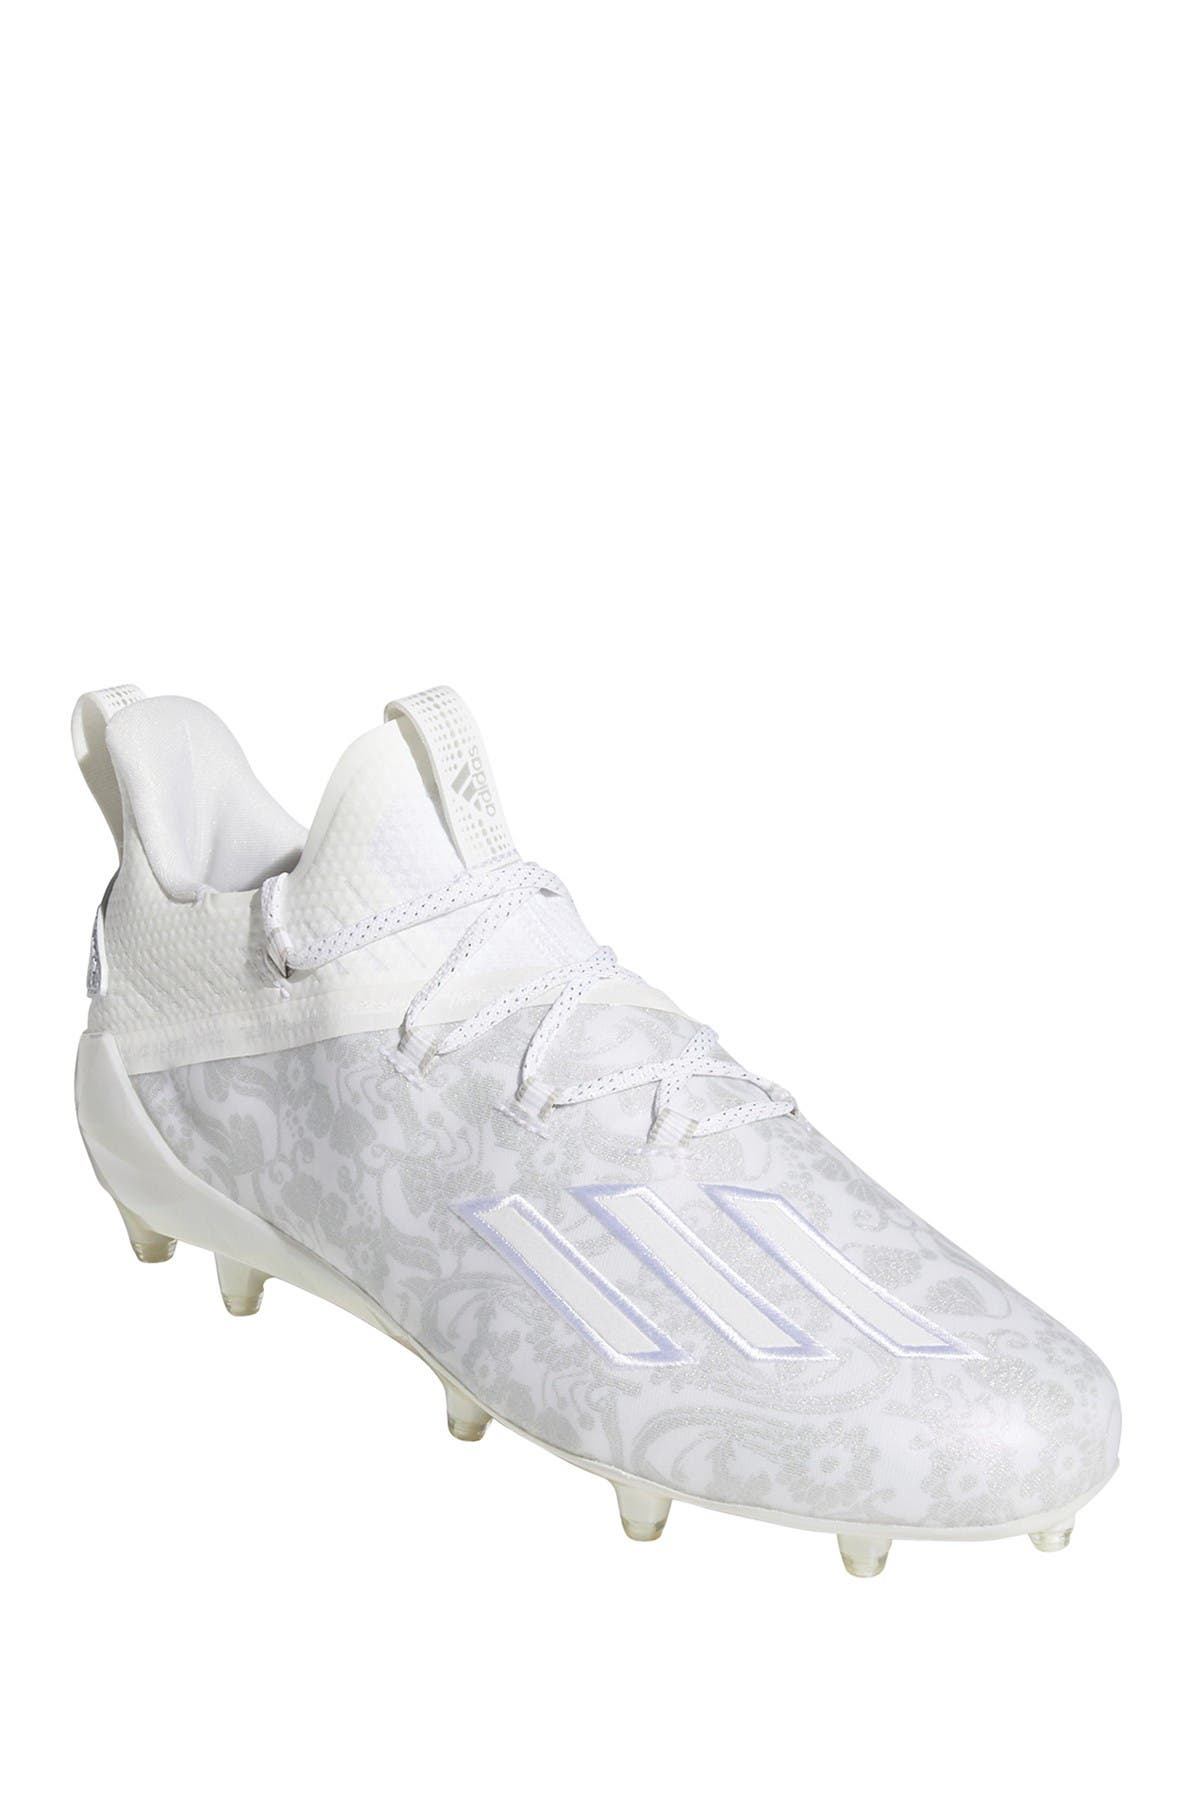 new reign cleats